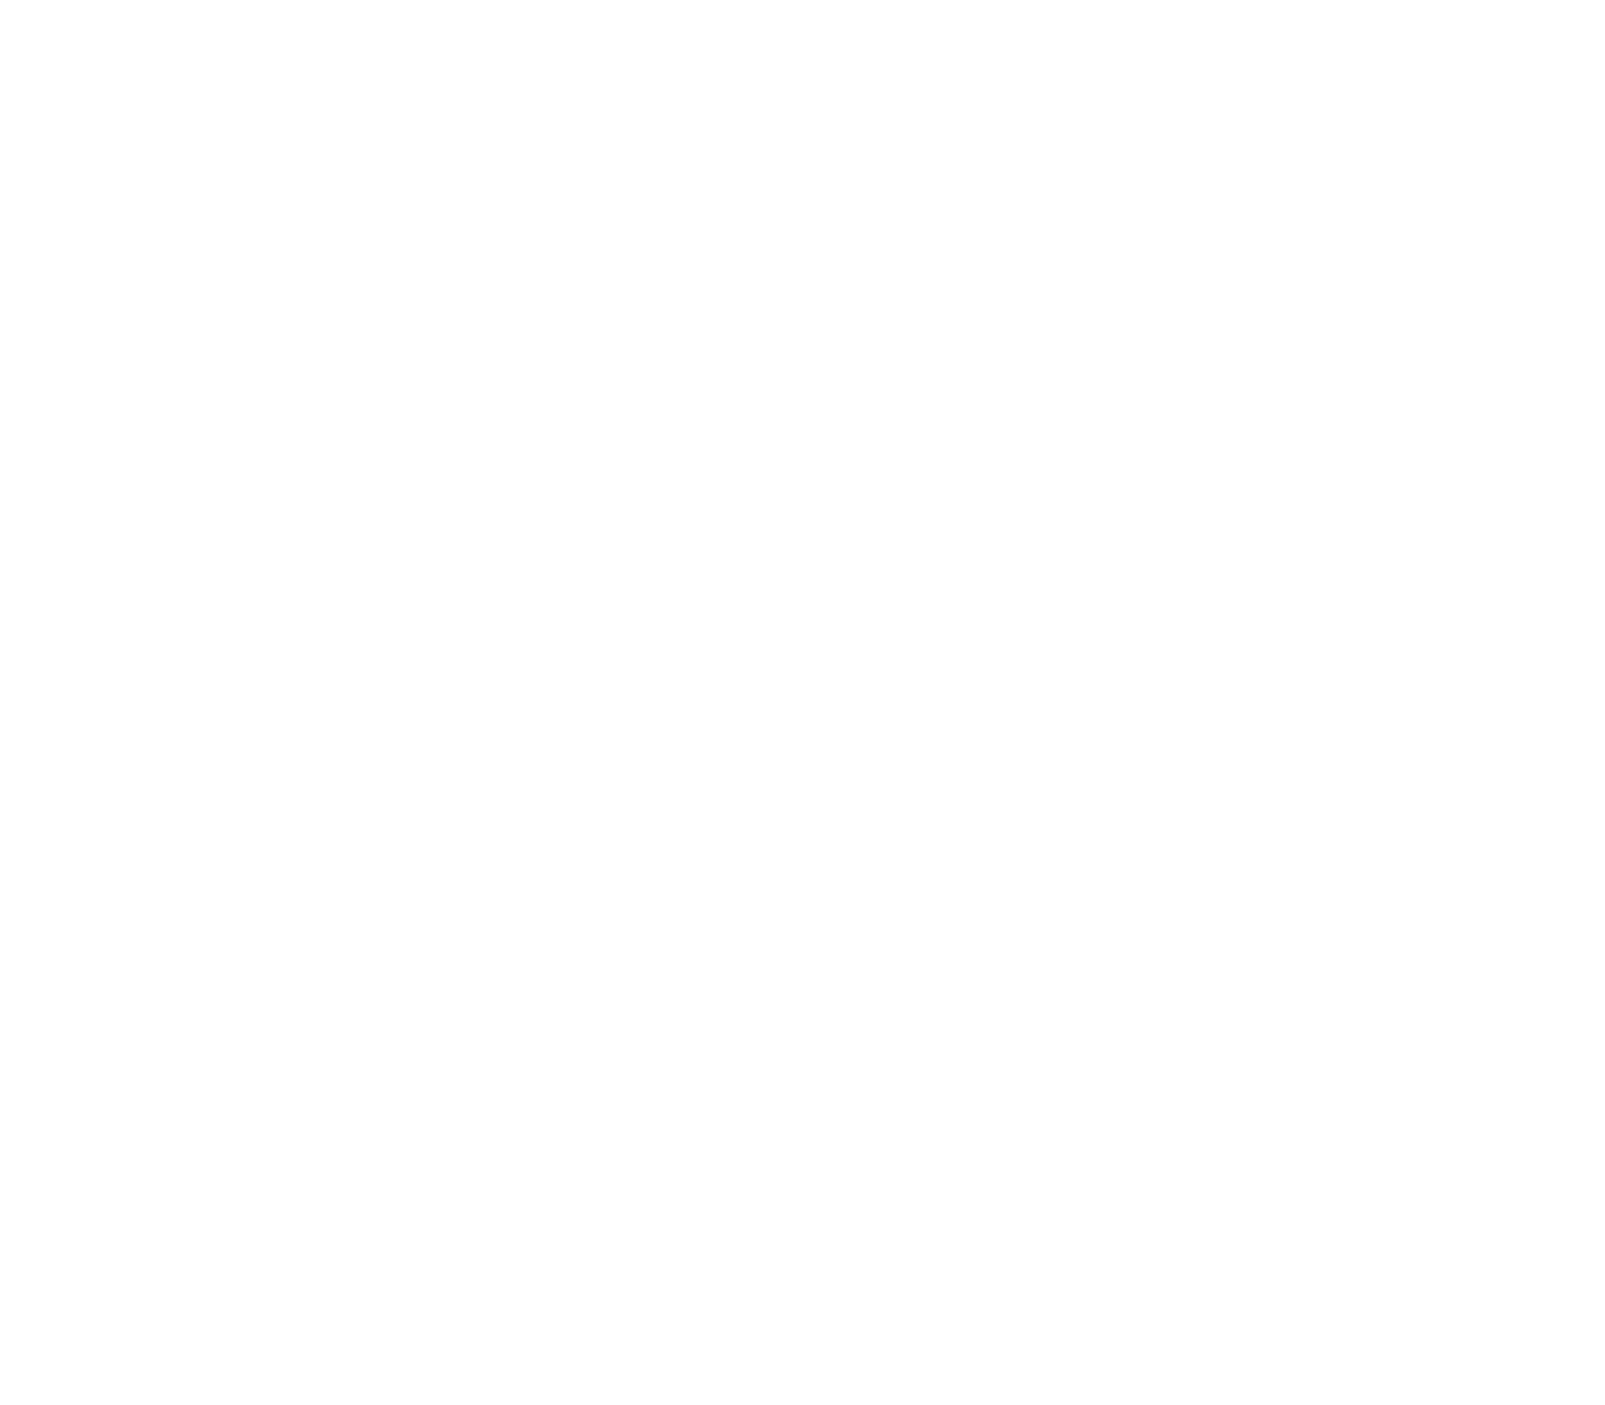 Butterfly Network logo for dark backgrounds (transparent PNG)